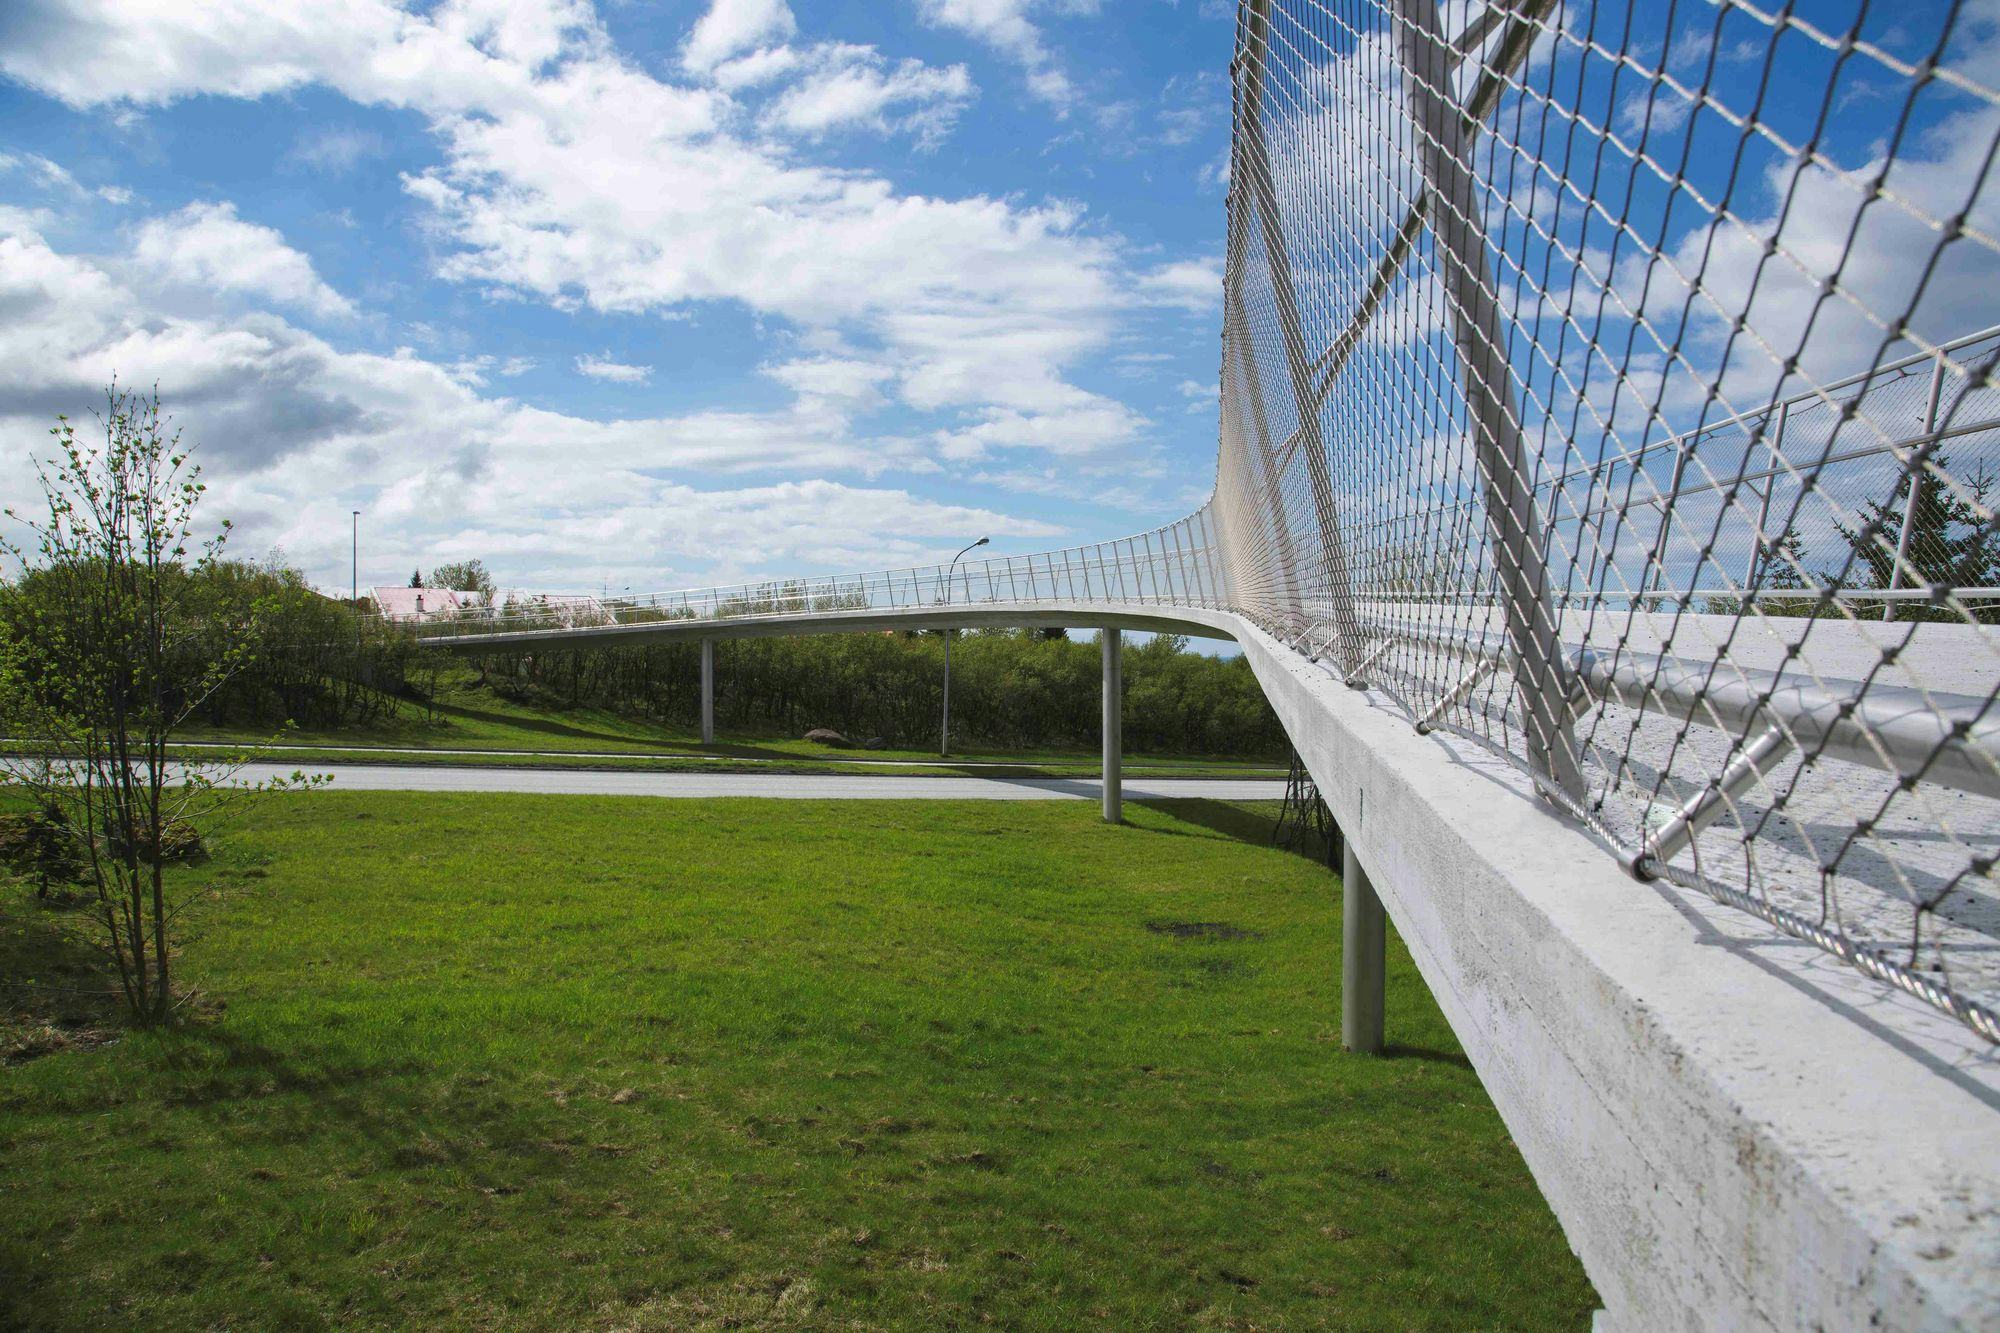 A pedestrian bridge with a unique curved design on a sunny day with partly cloudy sky